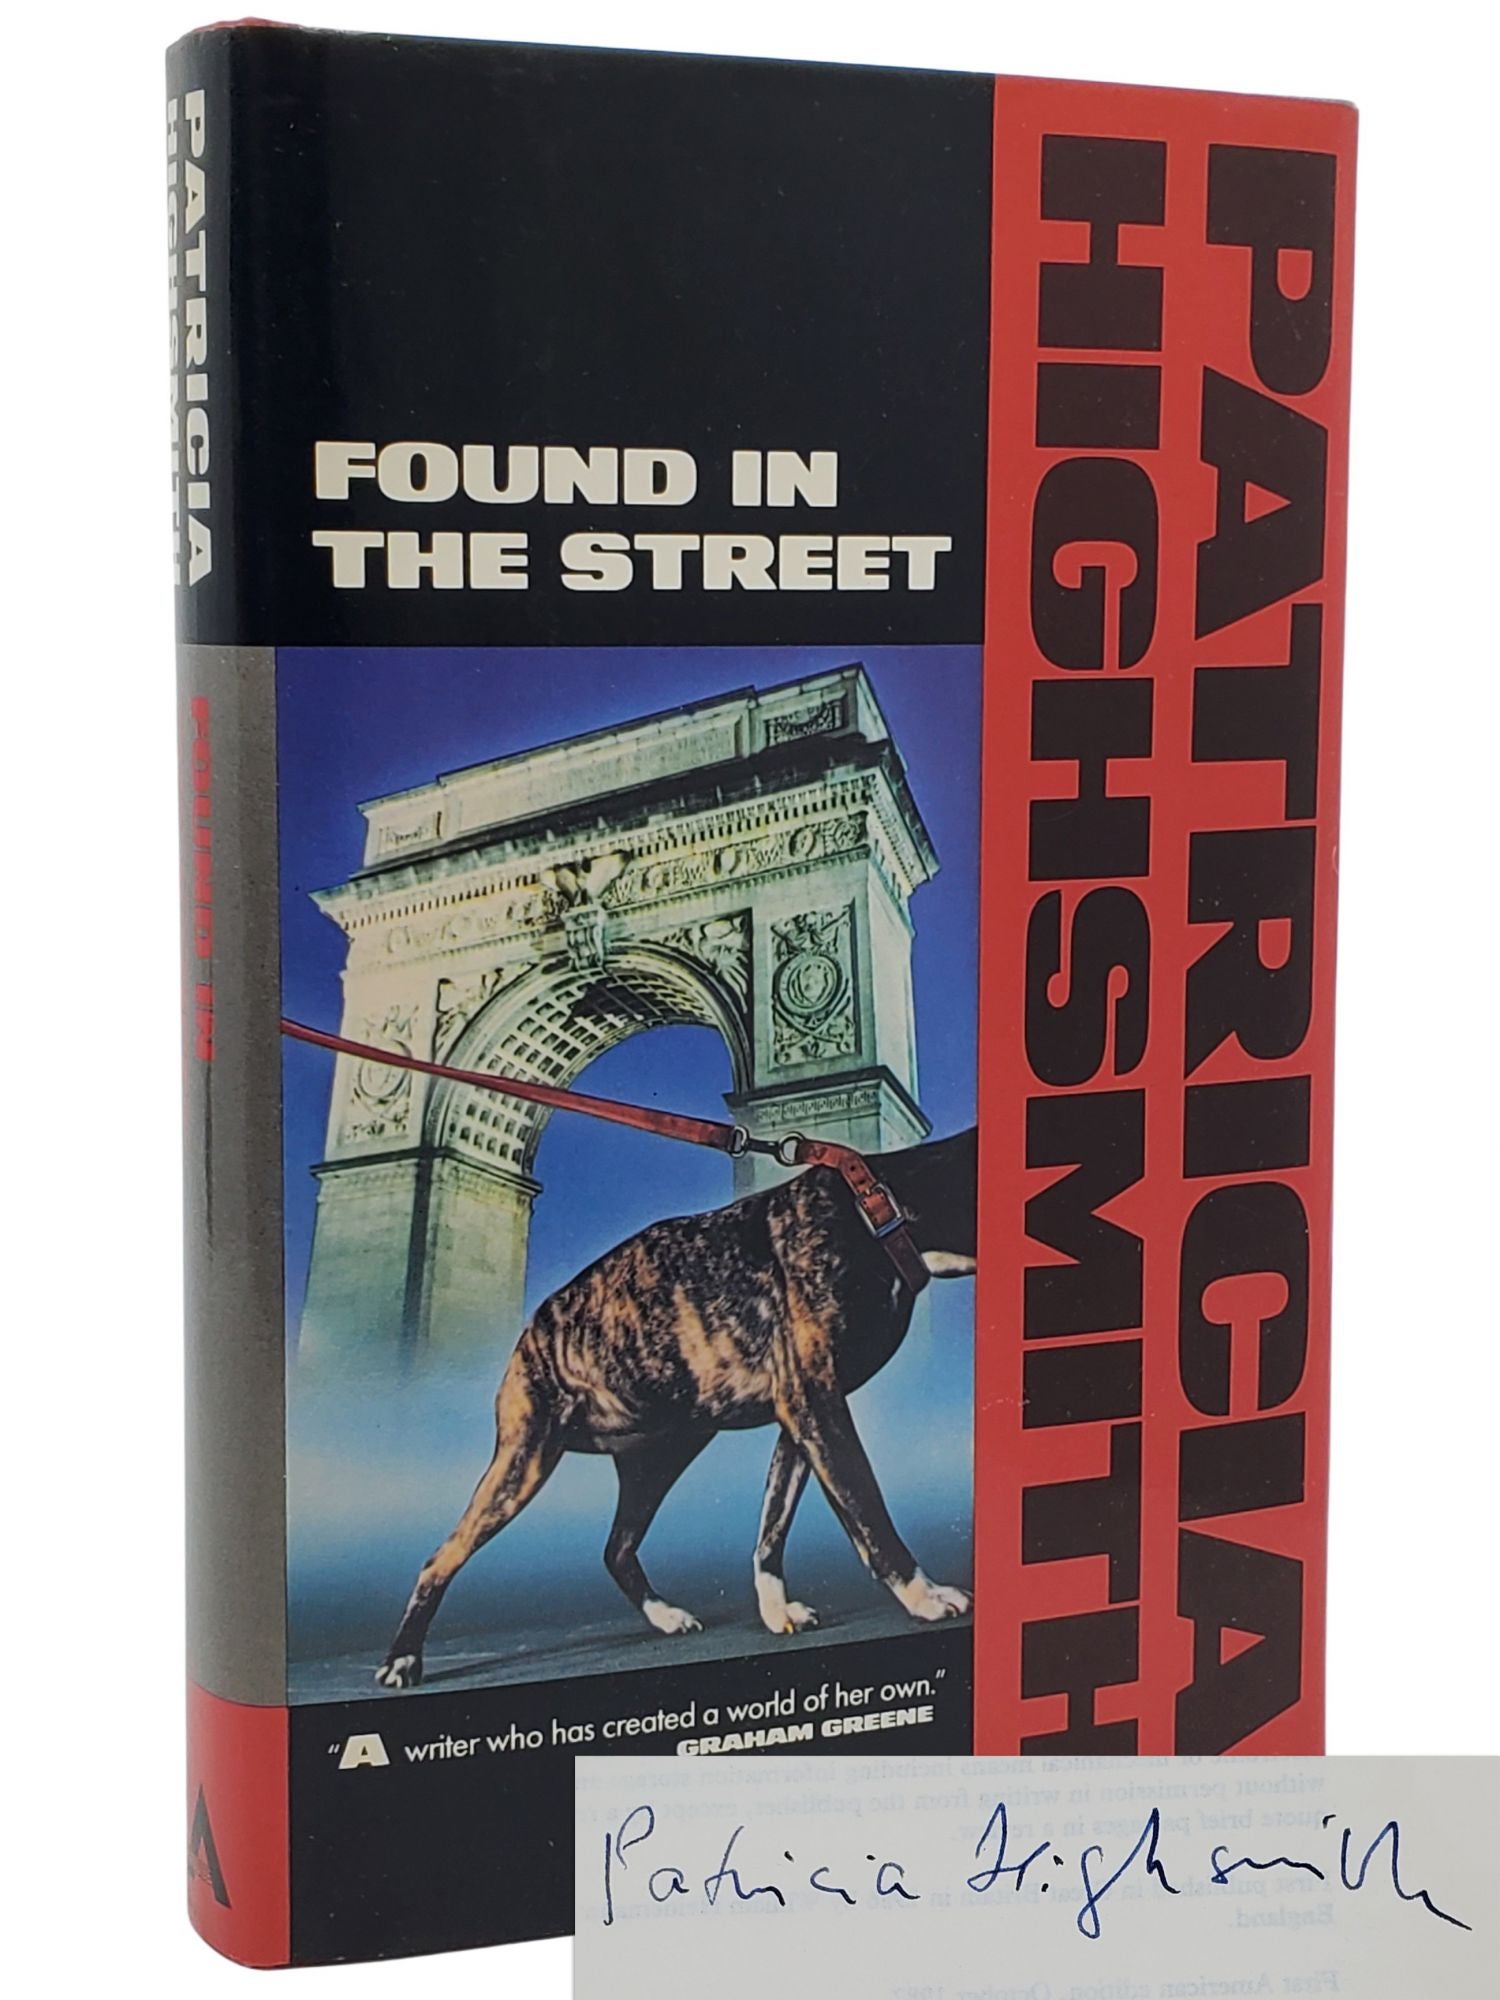 [Book #50250] FOUND IN THE STREET. Patricia Highsmith.